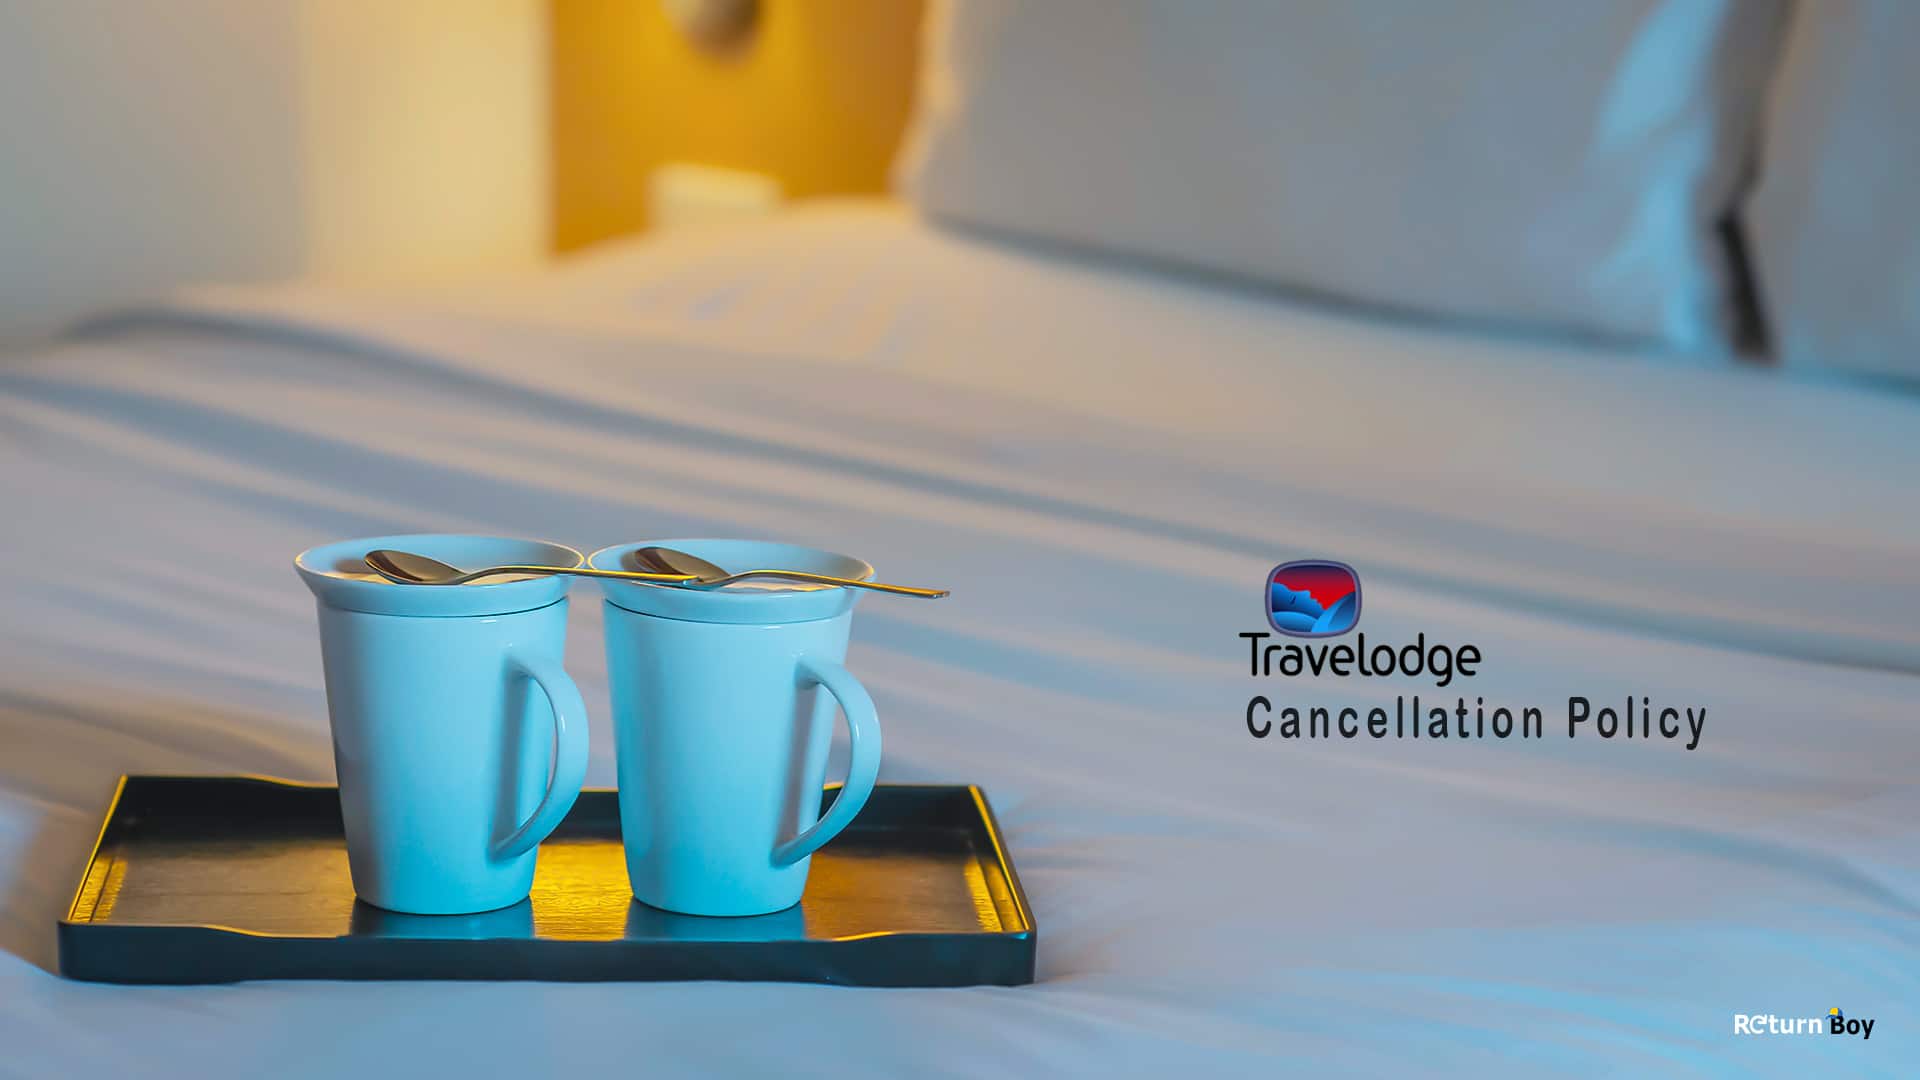 Travelodge Cancellation Policy